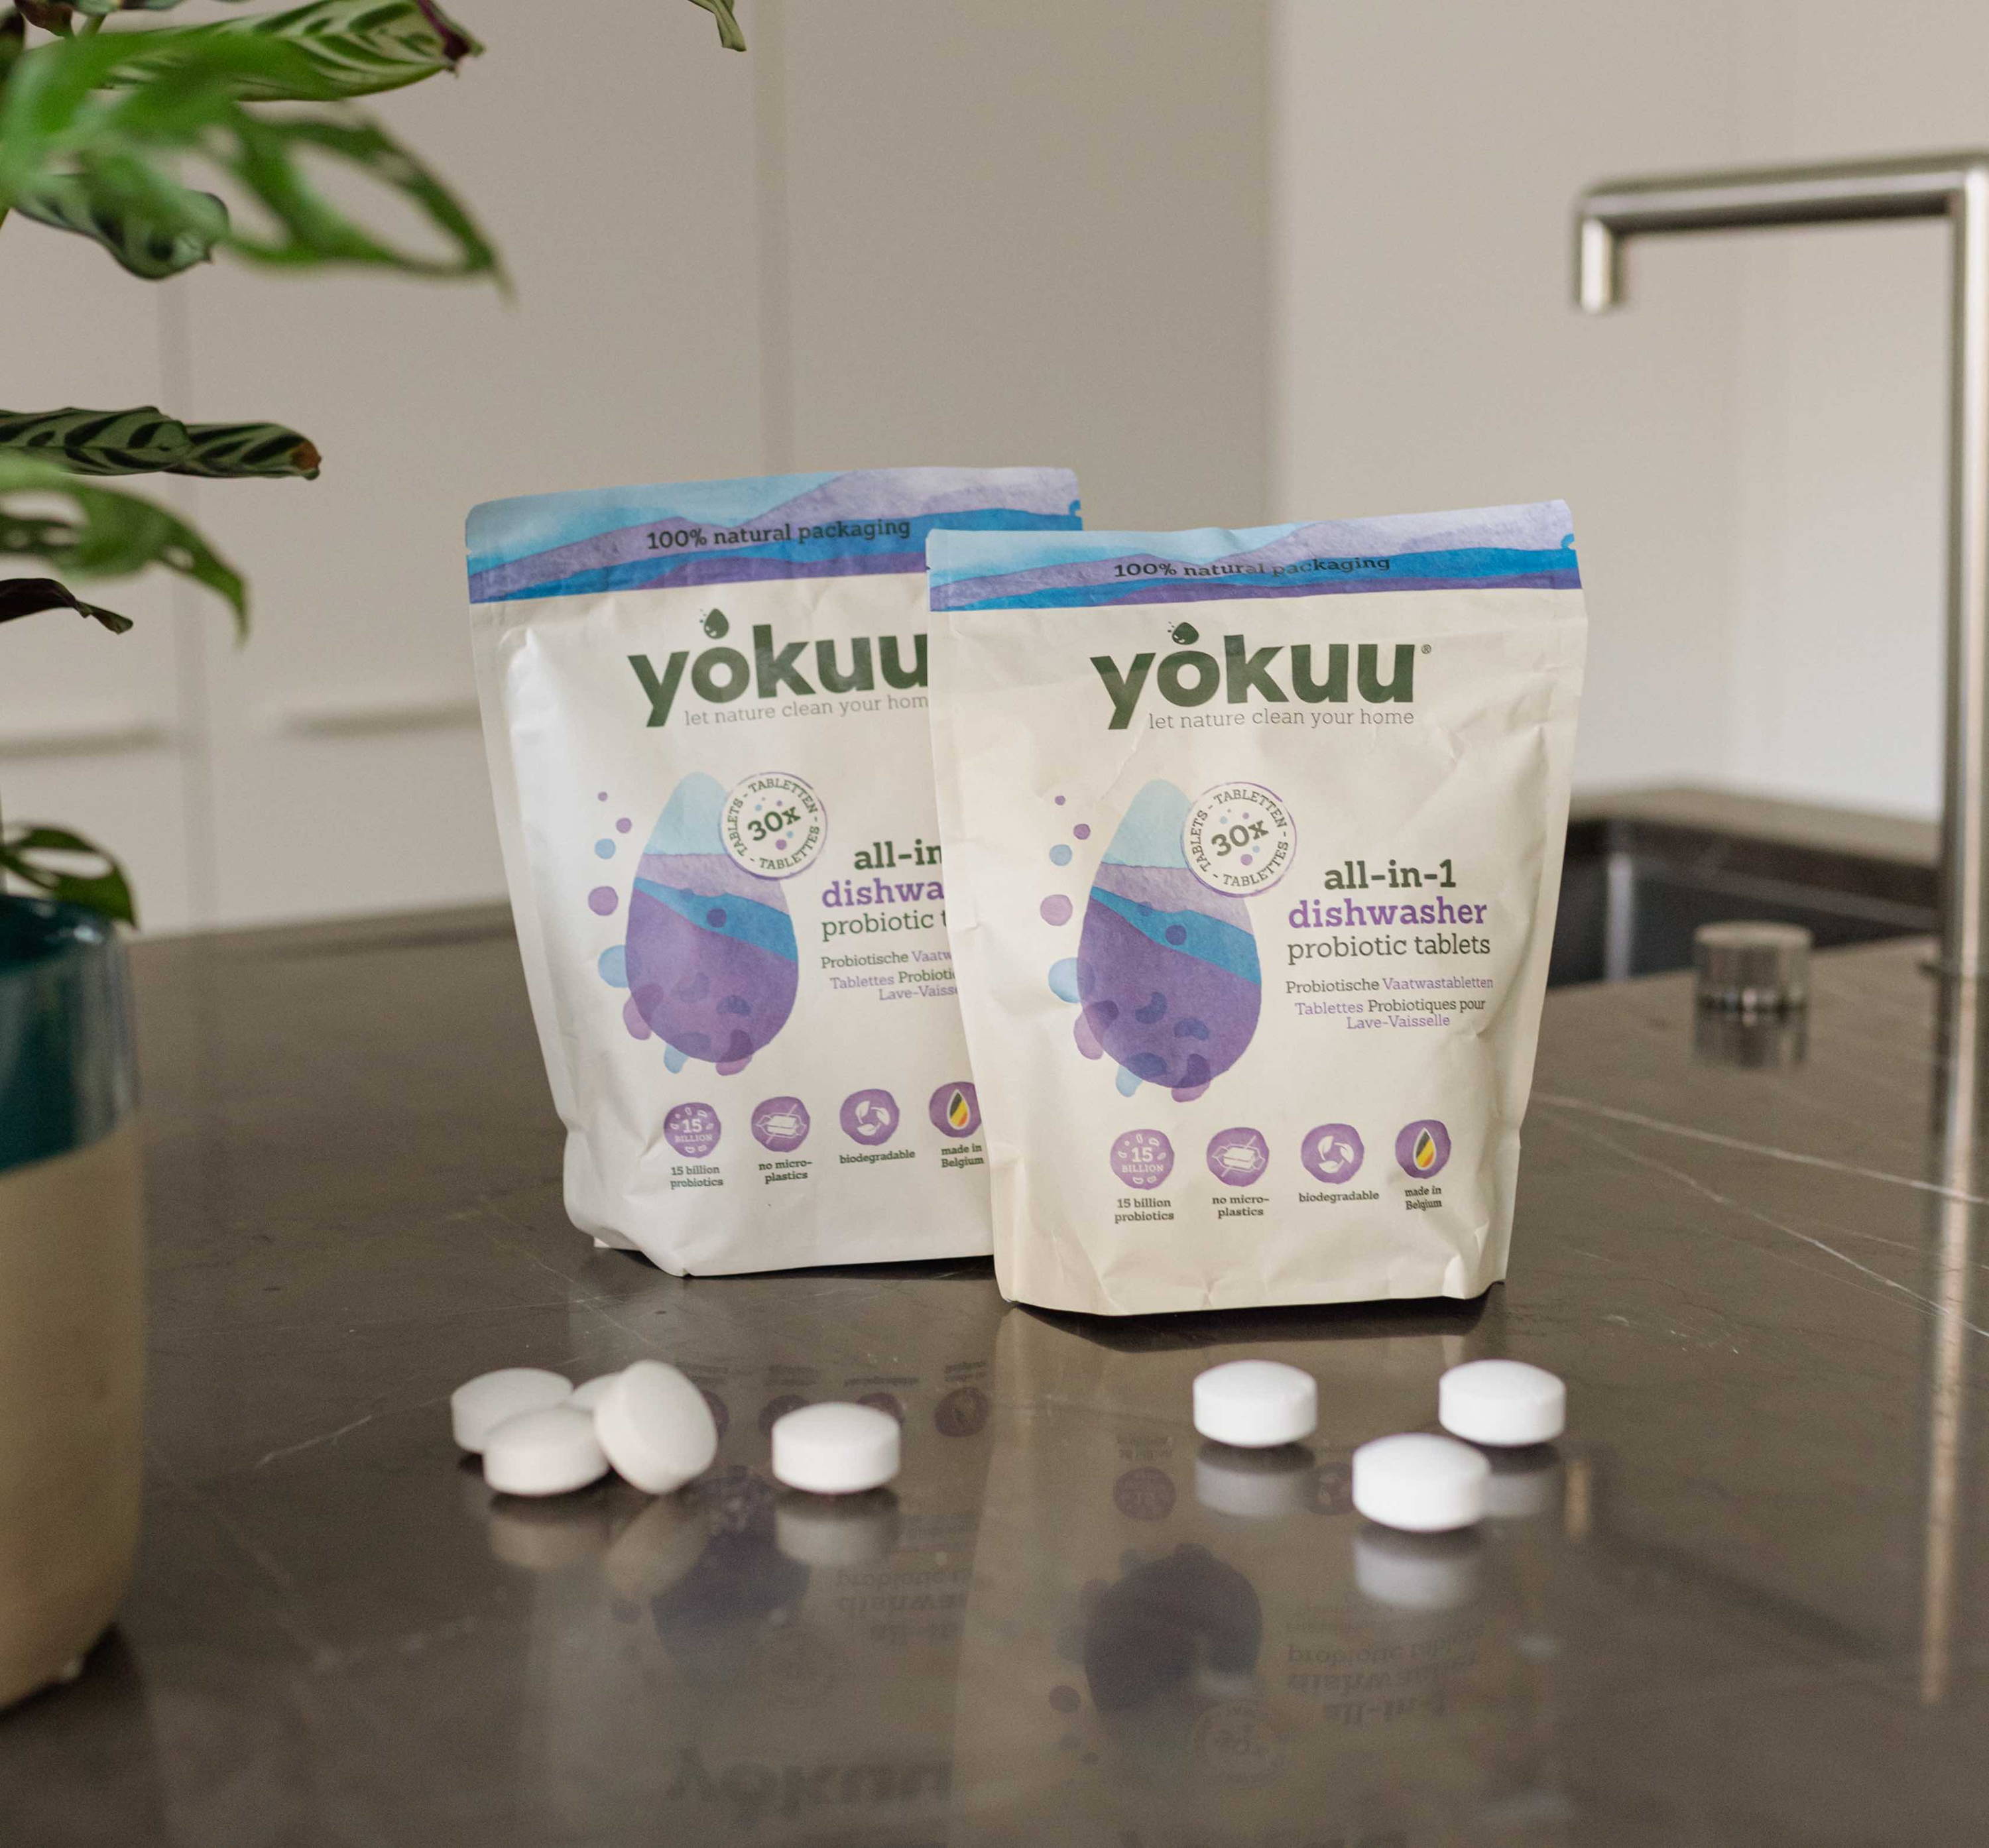 Two Yokuu dishwasher tablets packages are placed alongside plastic-free tablets on a marble surface with a plant in the foreground..